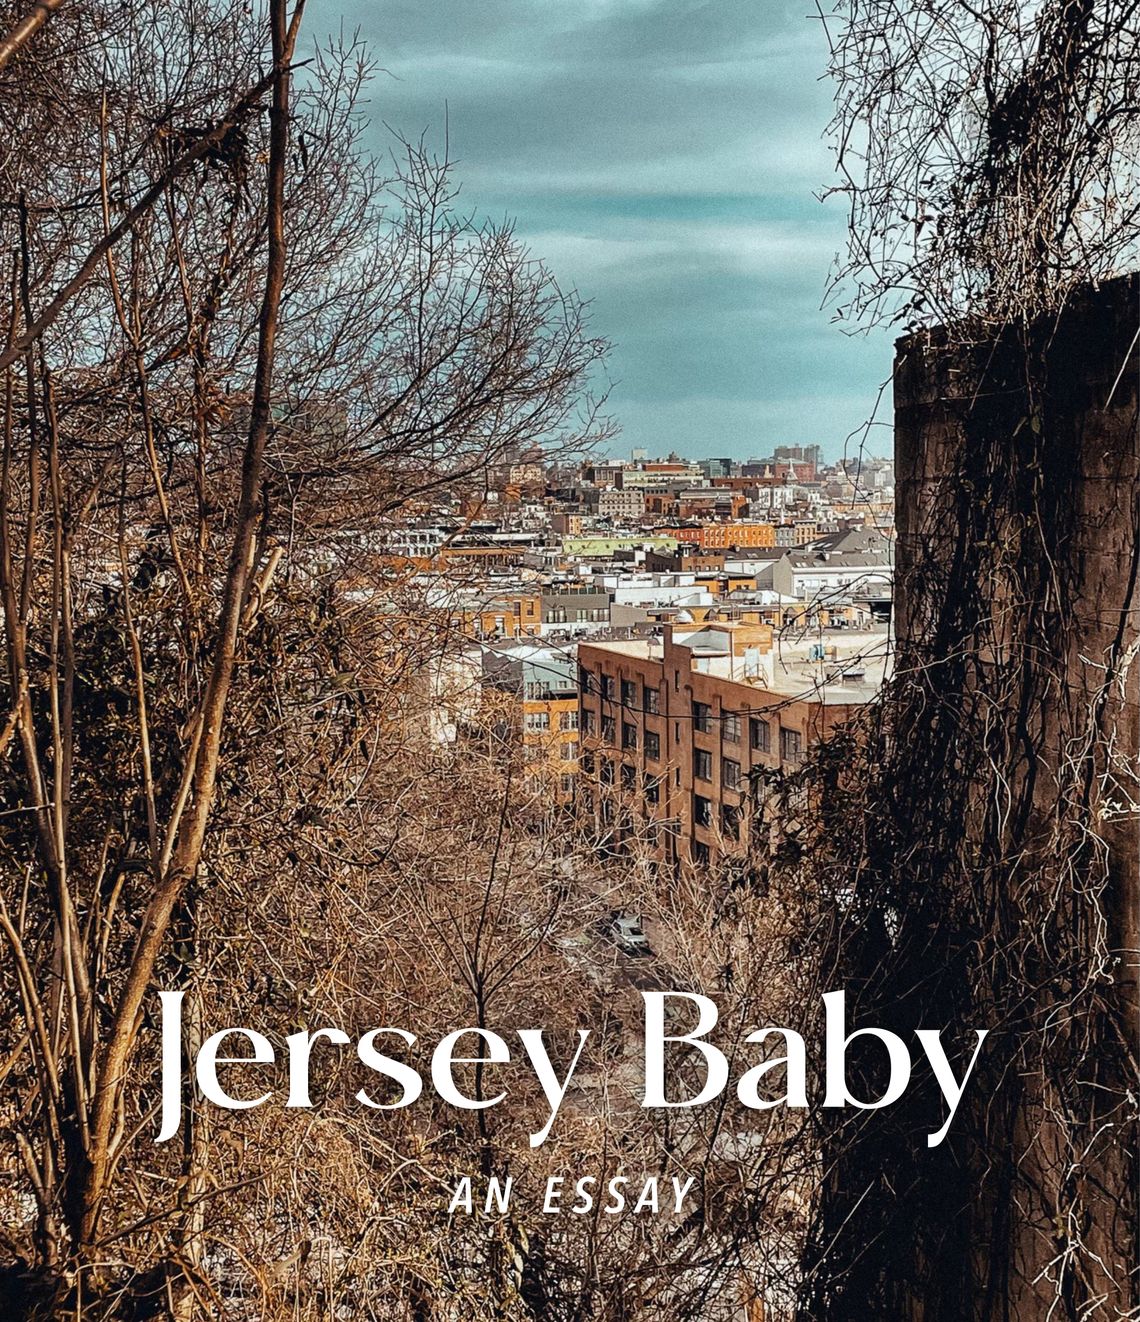 Jersey Baby